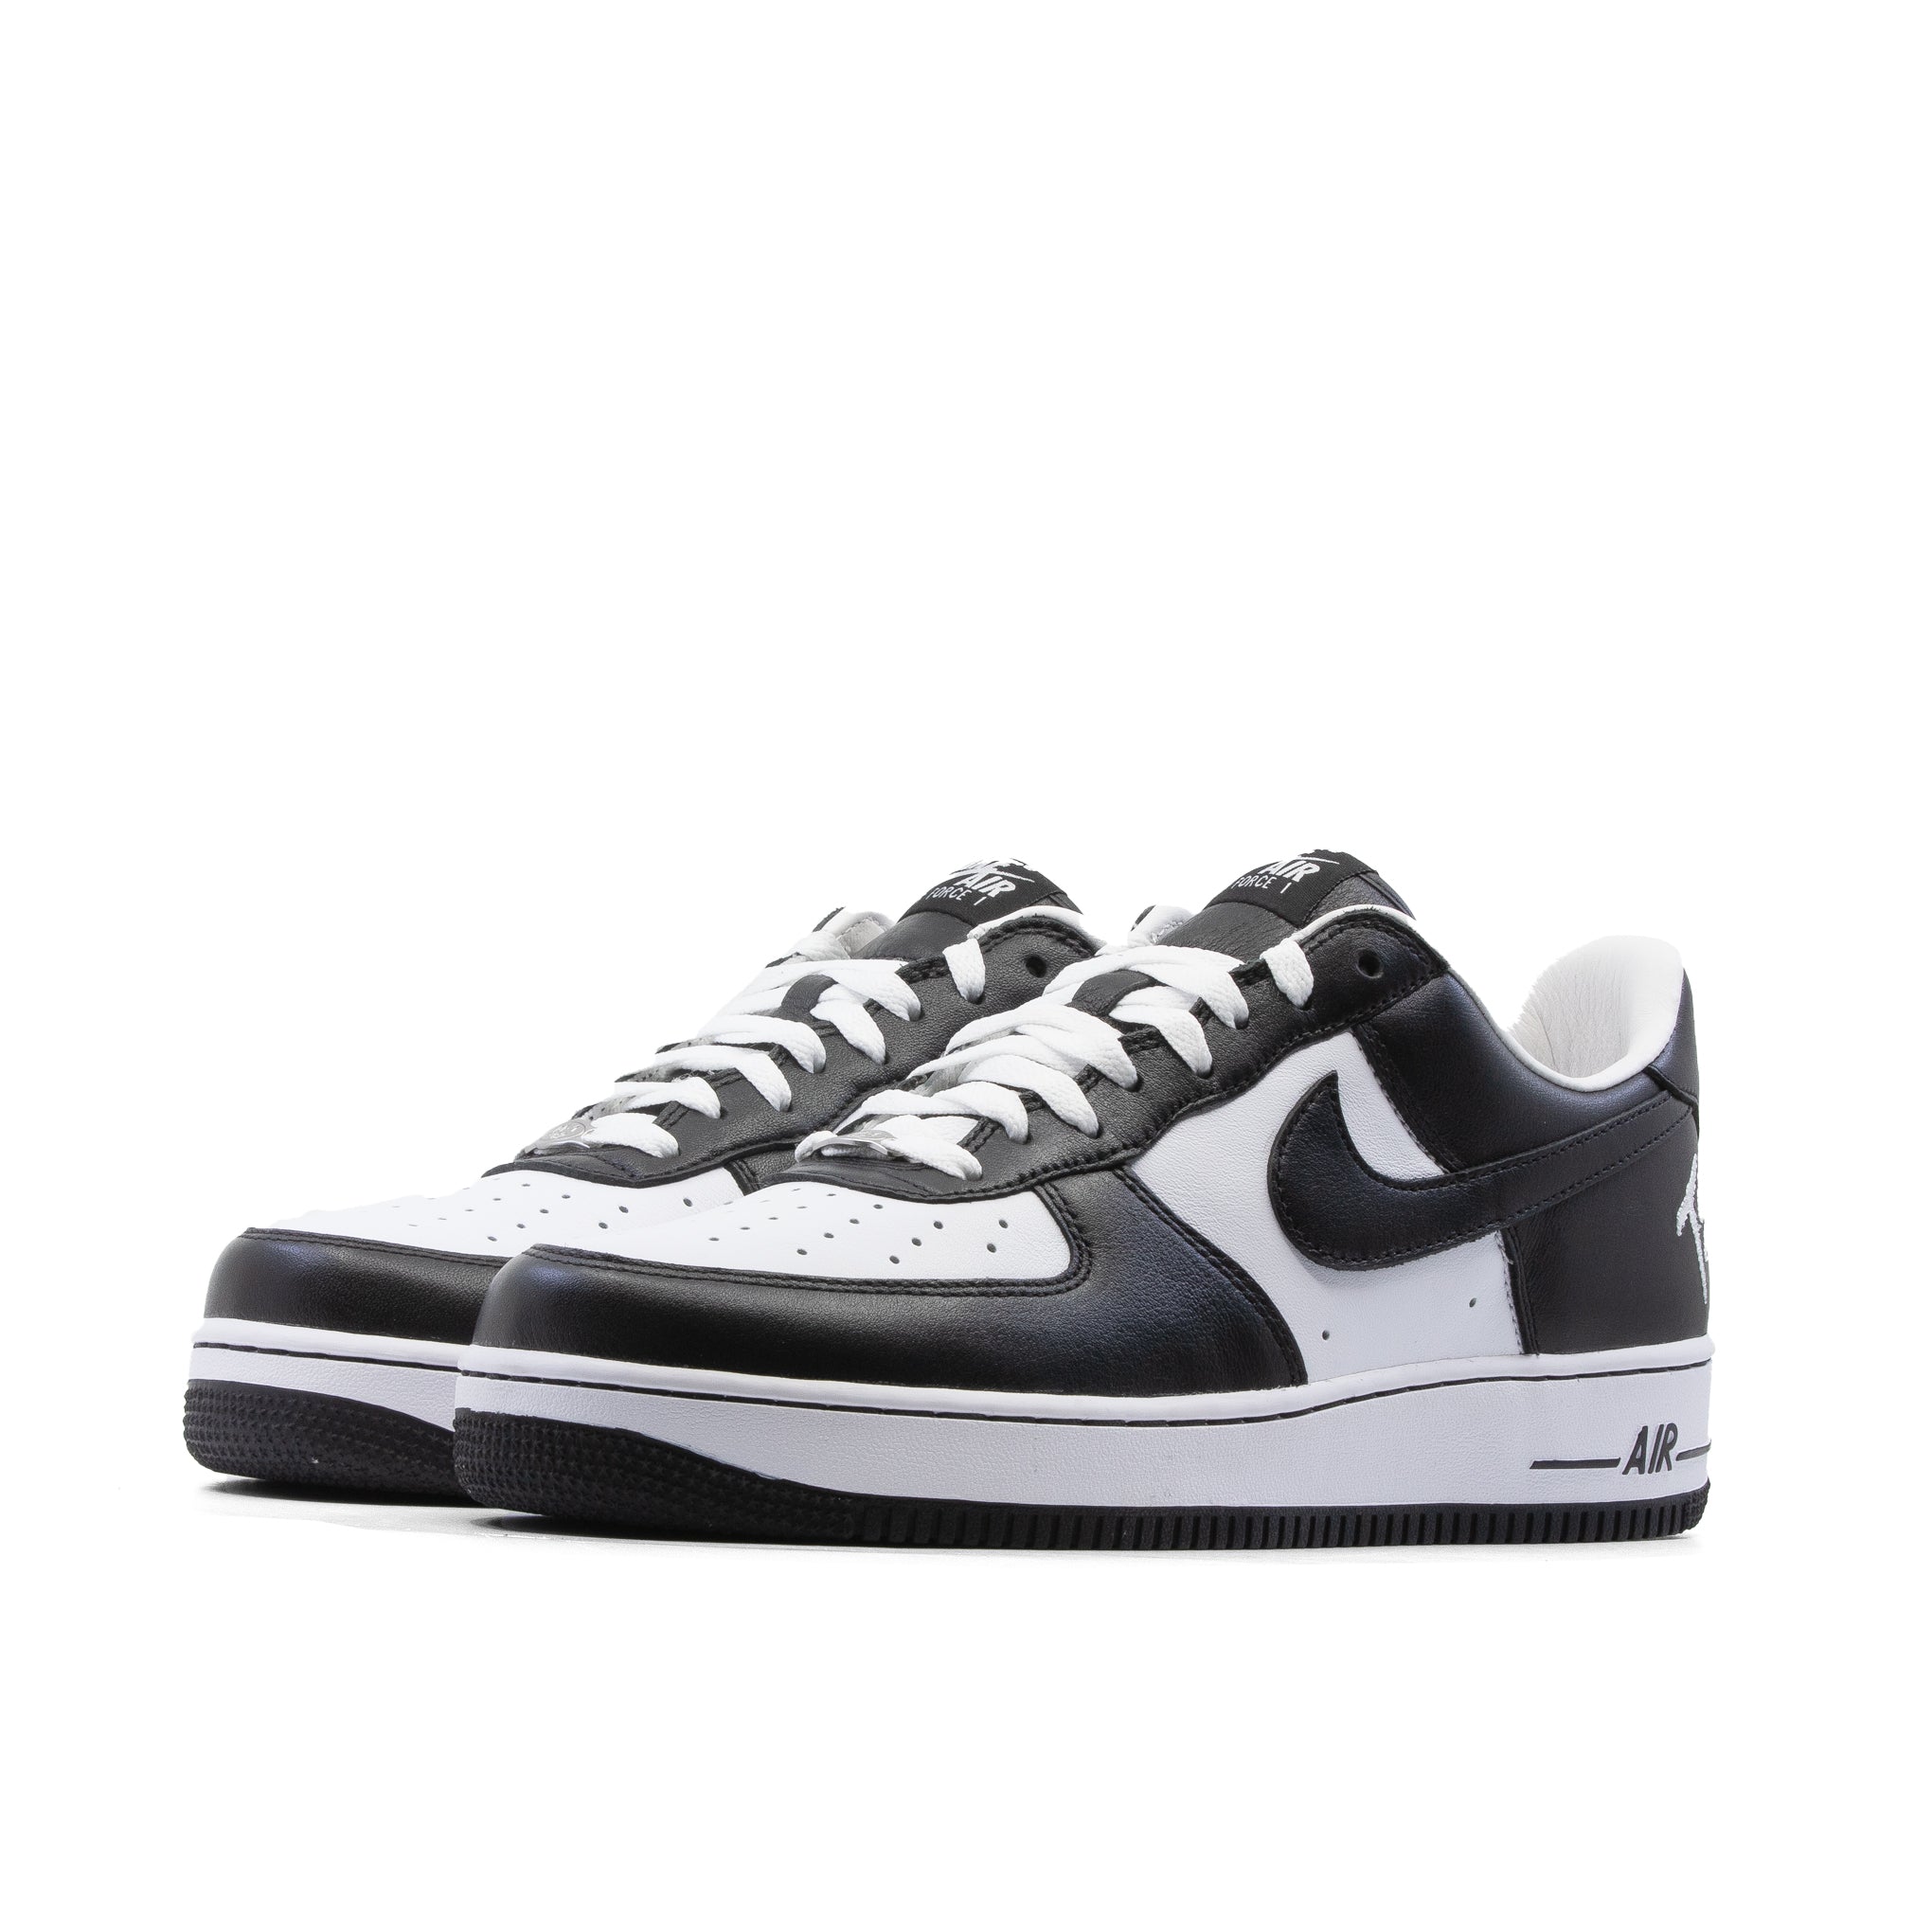 NIKE AIR FORCE 1 LOW TERROR SQUAD BLACKOUT